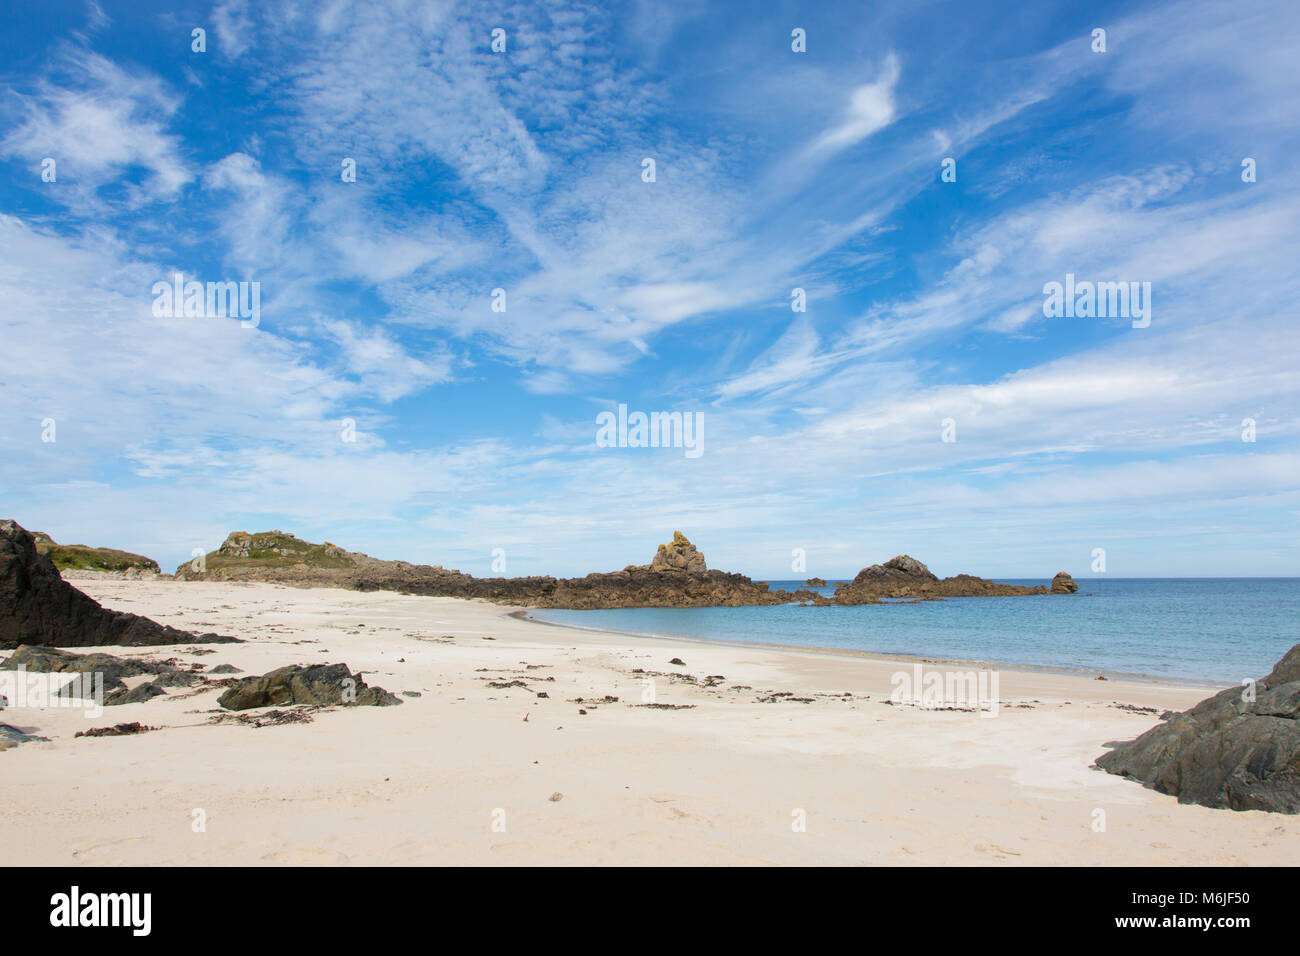 View of a beach at Bailiwick of Guernsey with white sand and rocks. Stock Photo